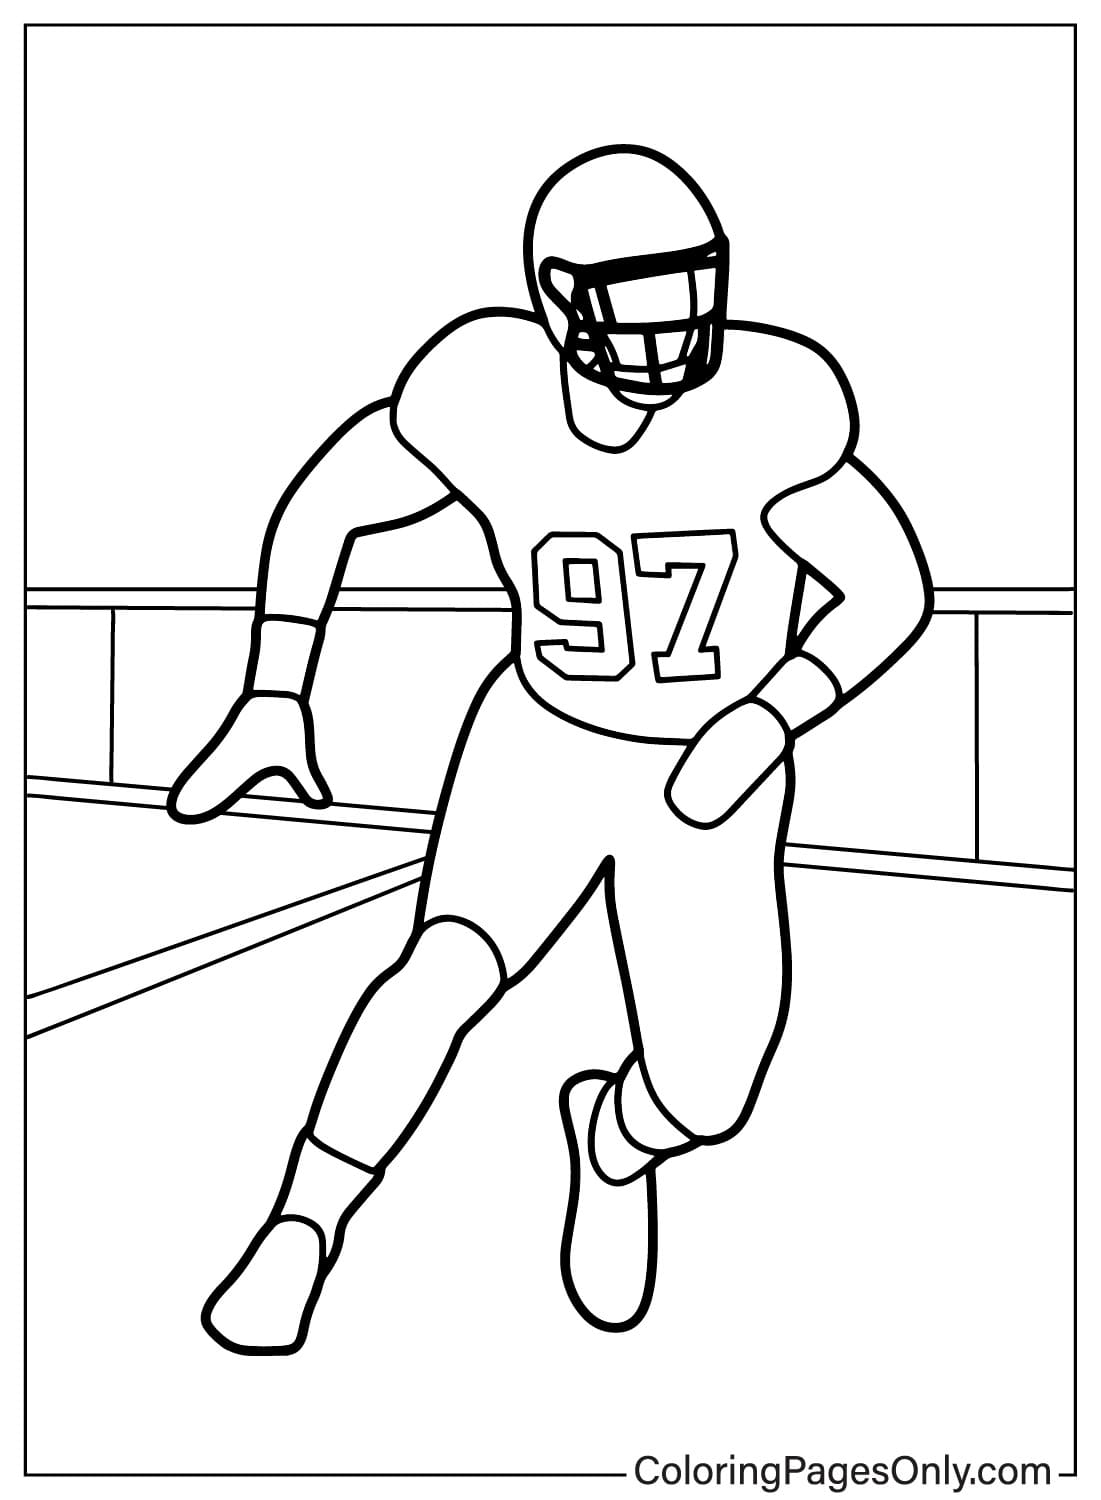 Nick Bosa Coloring Page from San Francisco 49ers